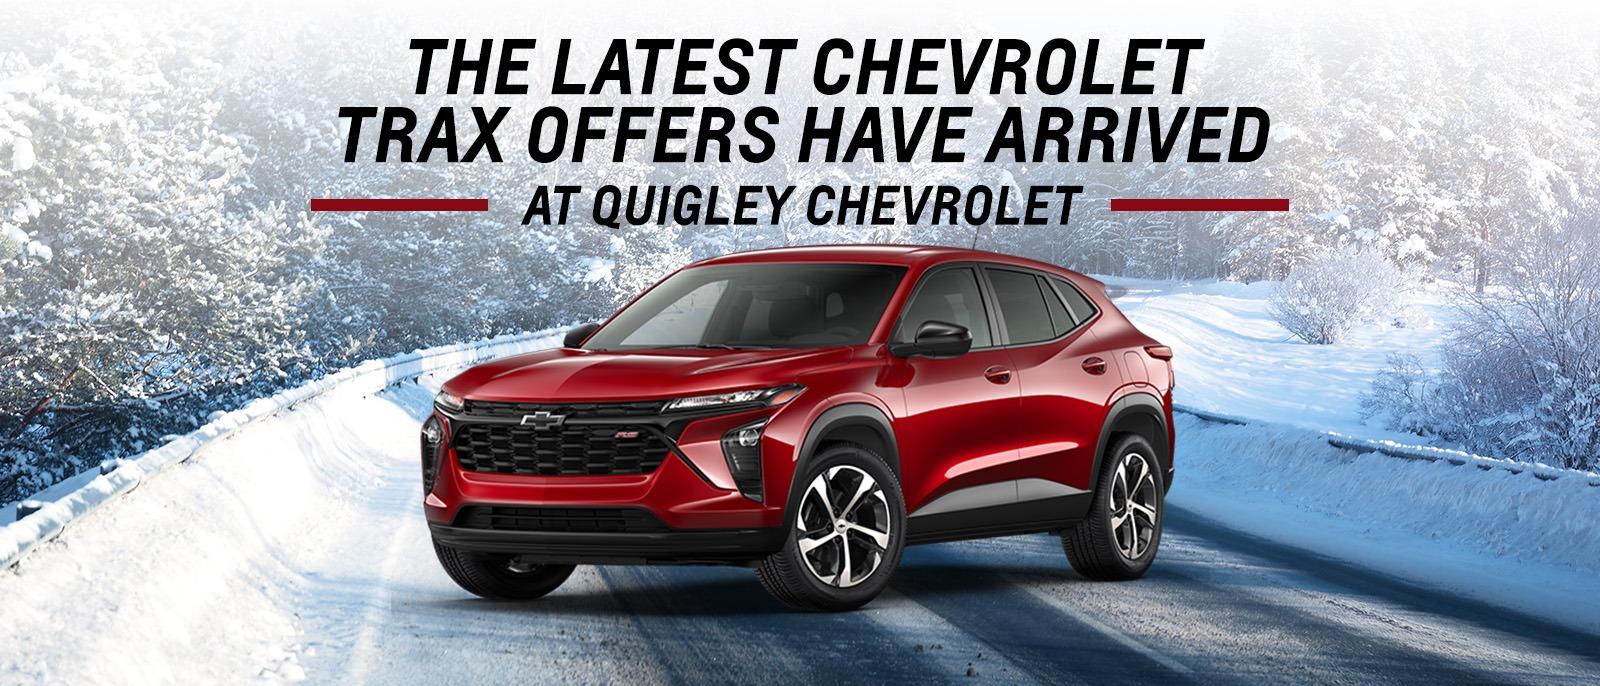 THE LATEST CHEVROLET TRAX OFFERS HAVE ARRIVED AT QUIGLEY CHEVROLET